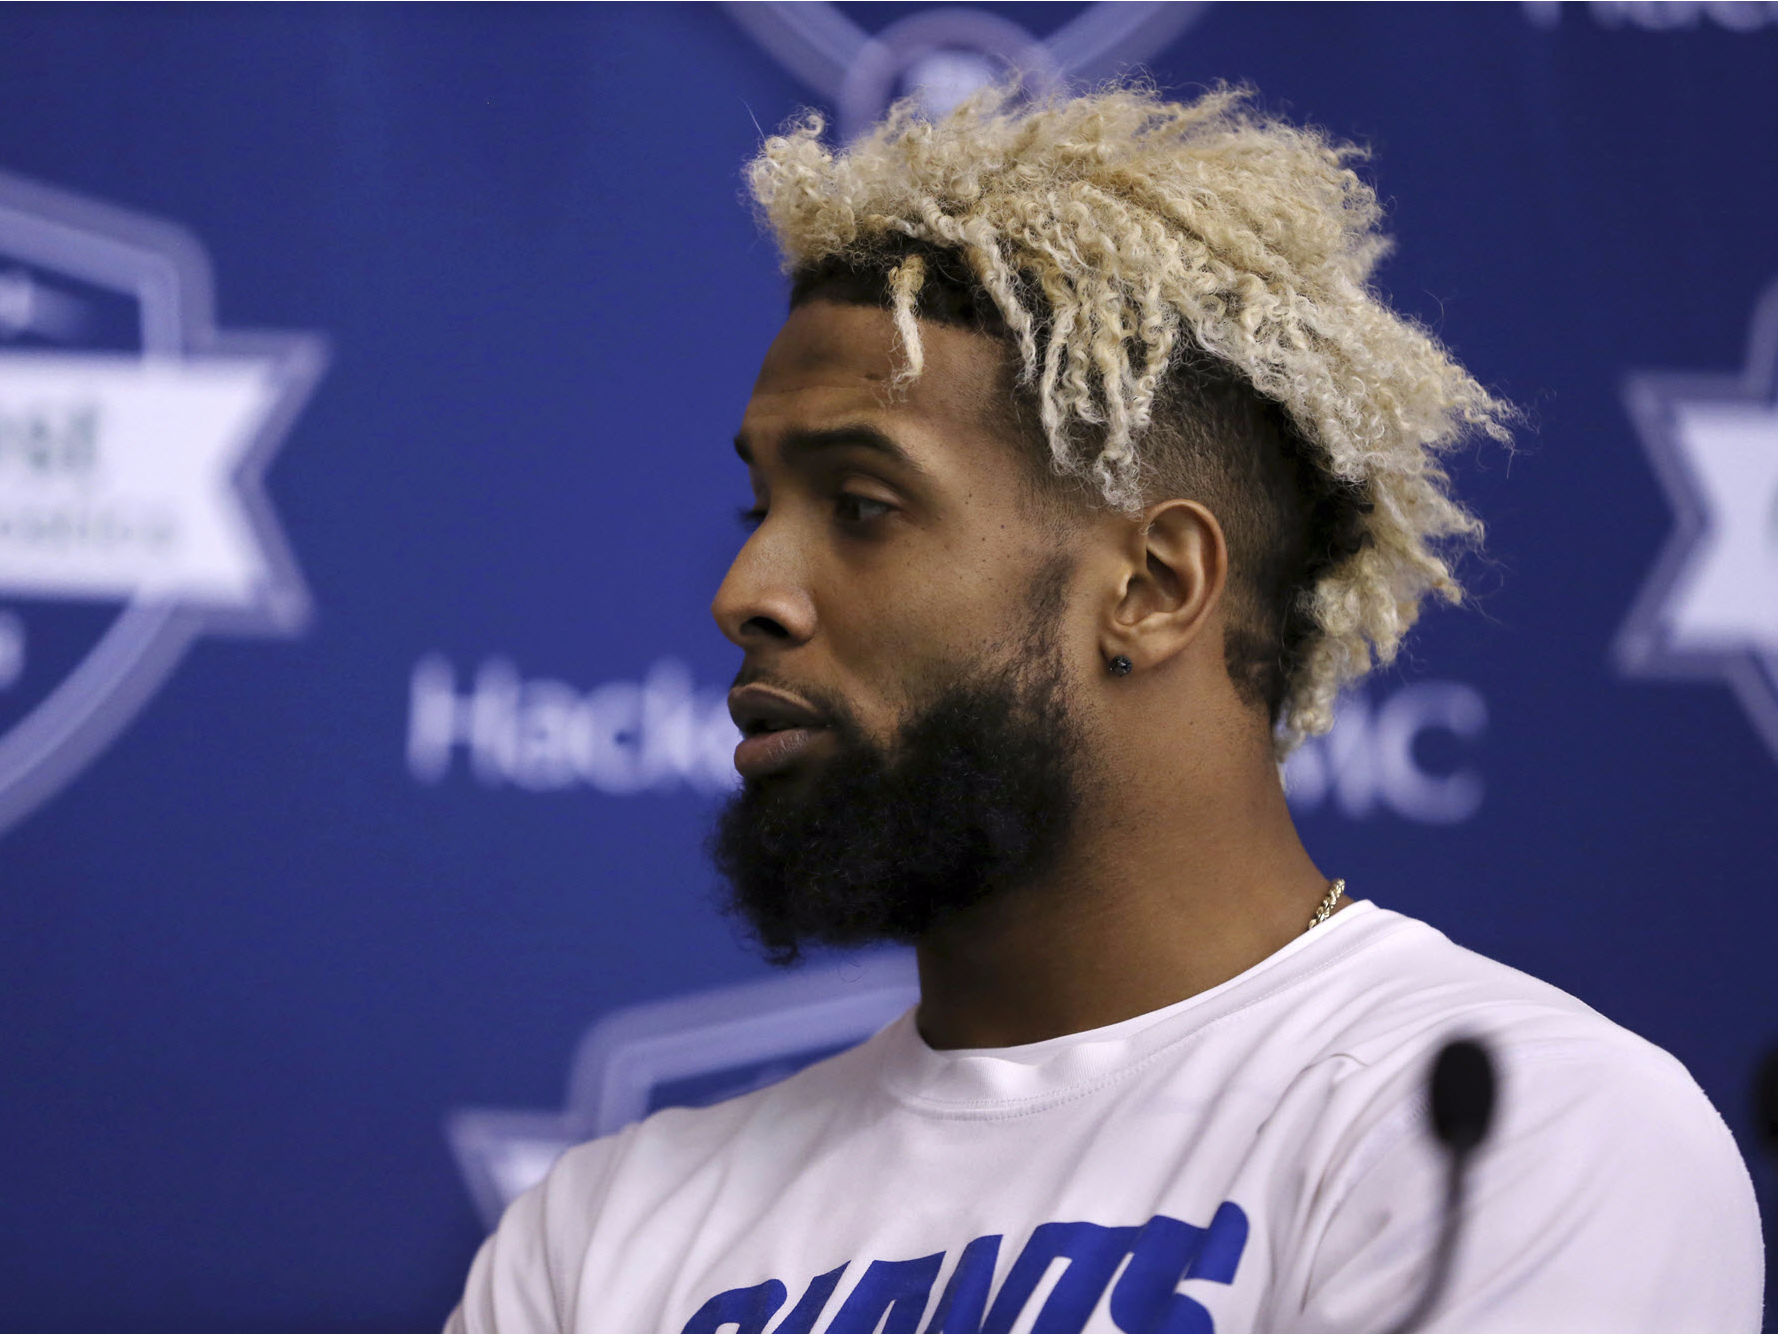 Odell Beckham Jr. in New York Giants attire, HD wallpaper and background.